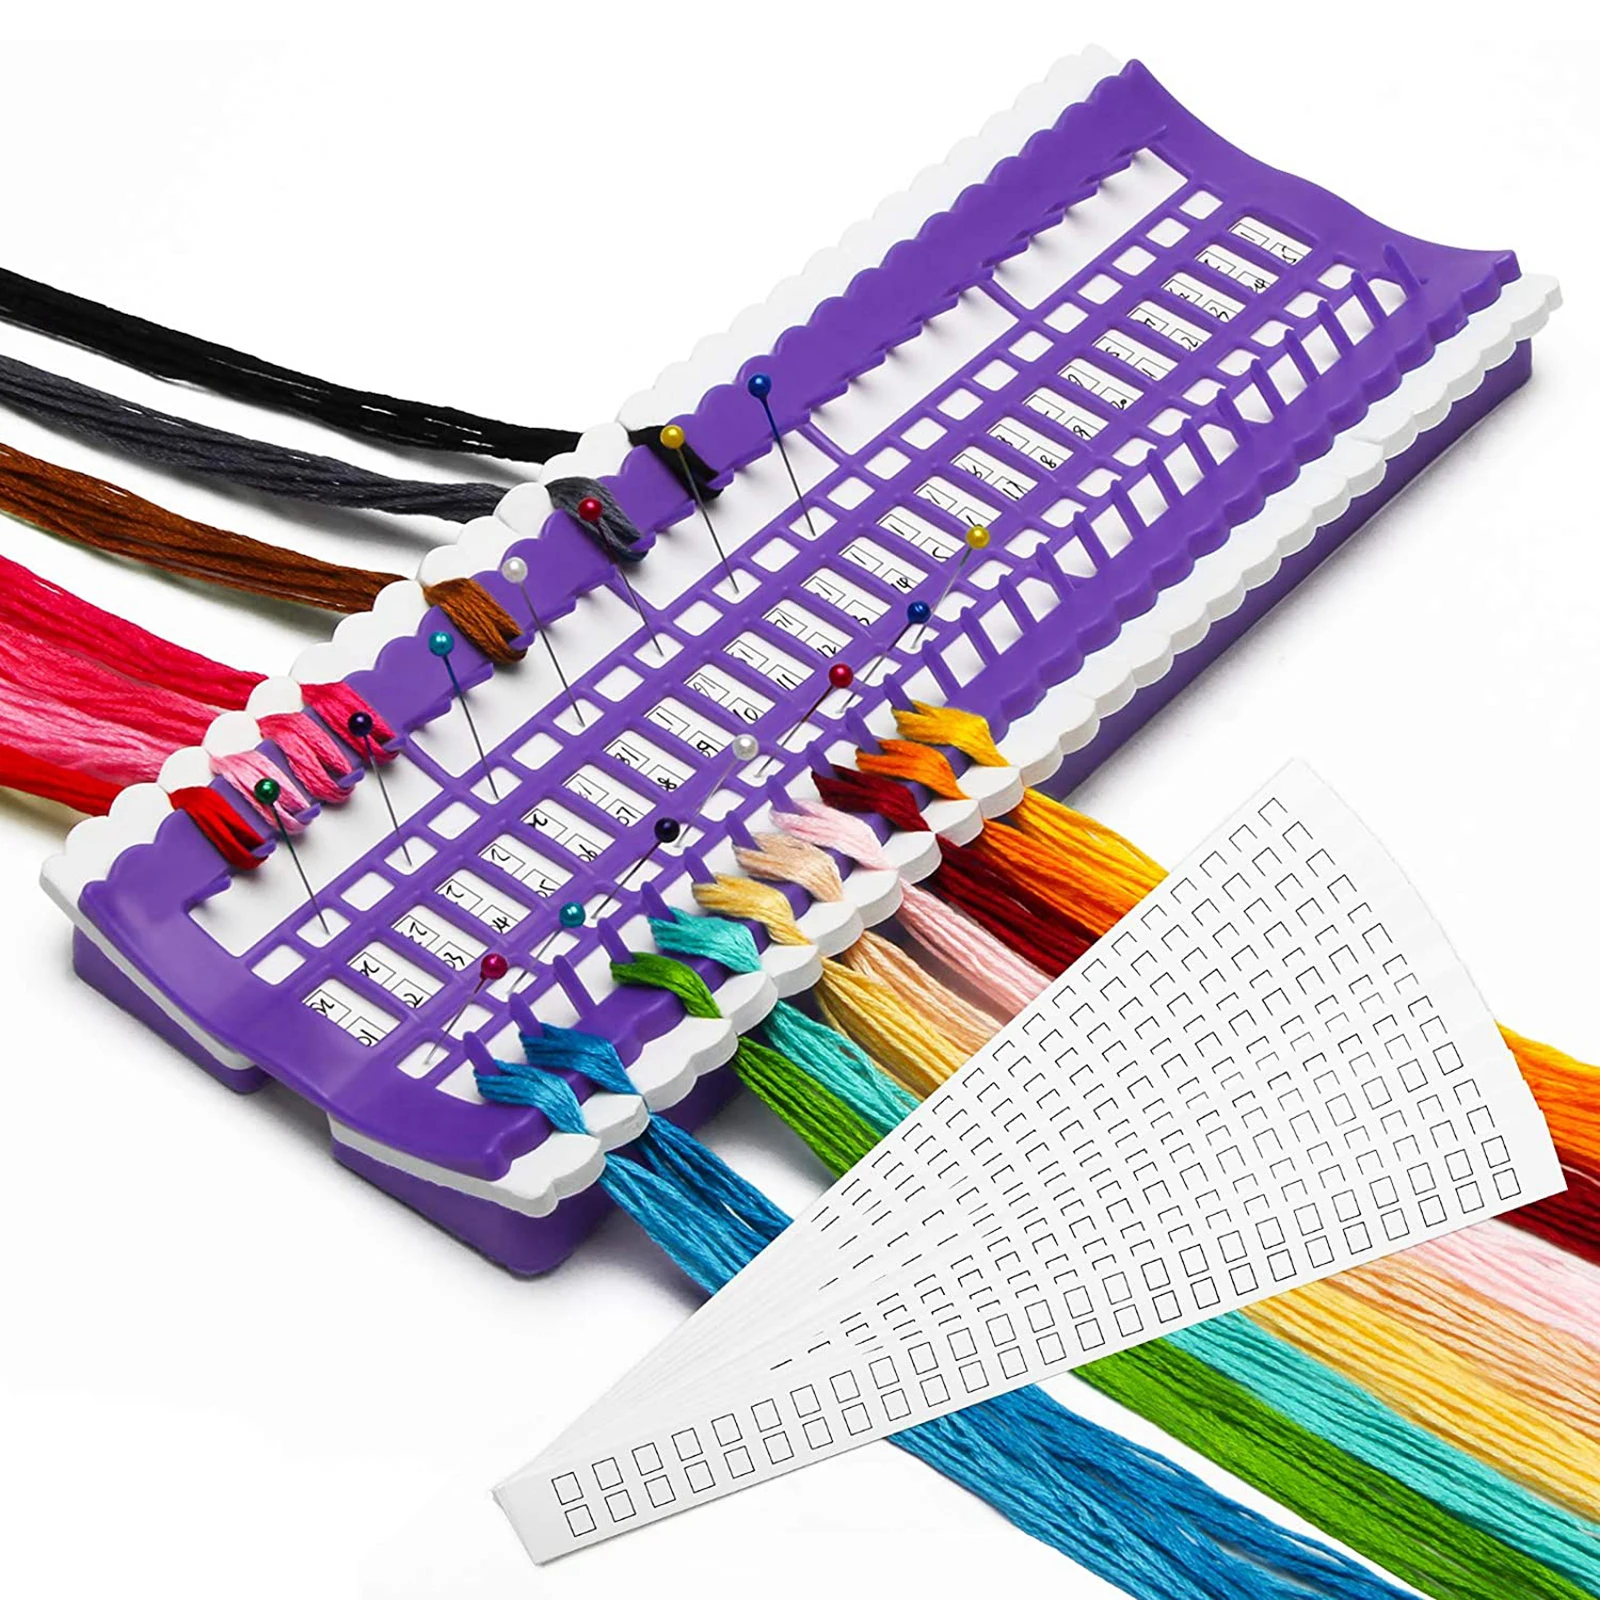 Durable Sewing Floss Organizer, Reusable Plastic Cross Stitch Row Line Threads Sorting Cards Tools,50 Positions Organizers